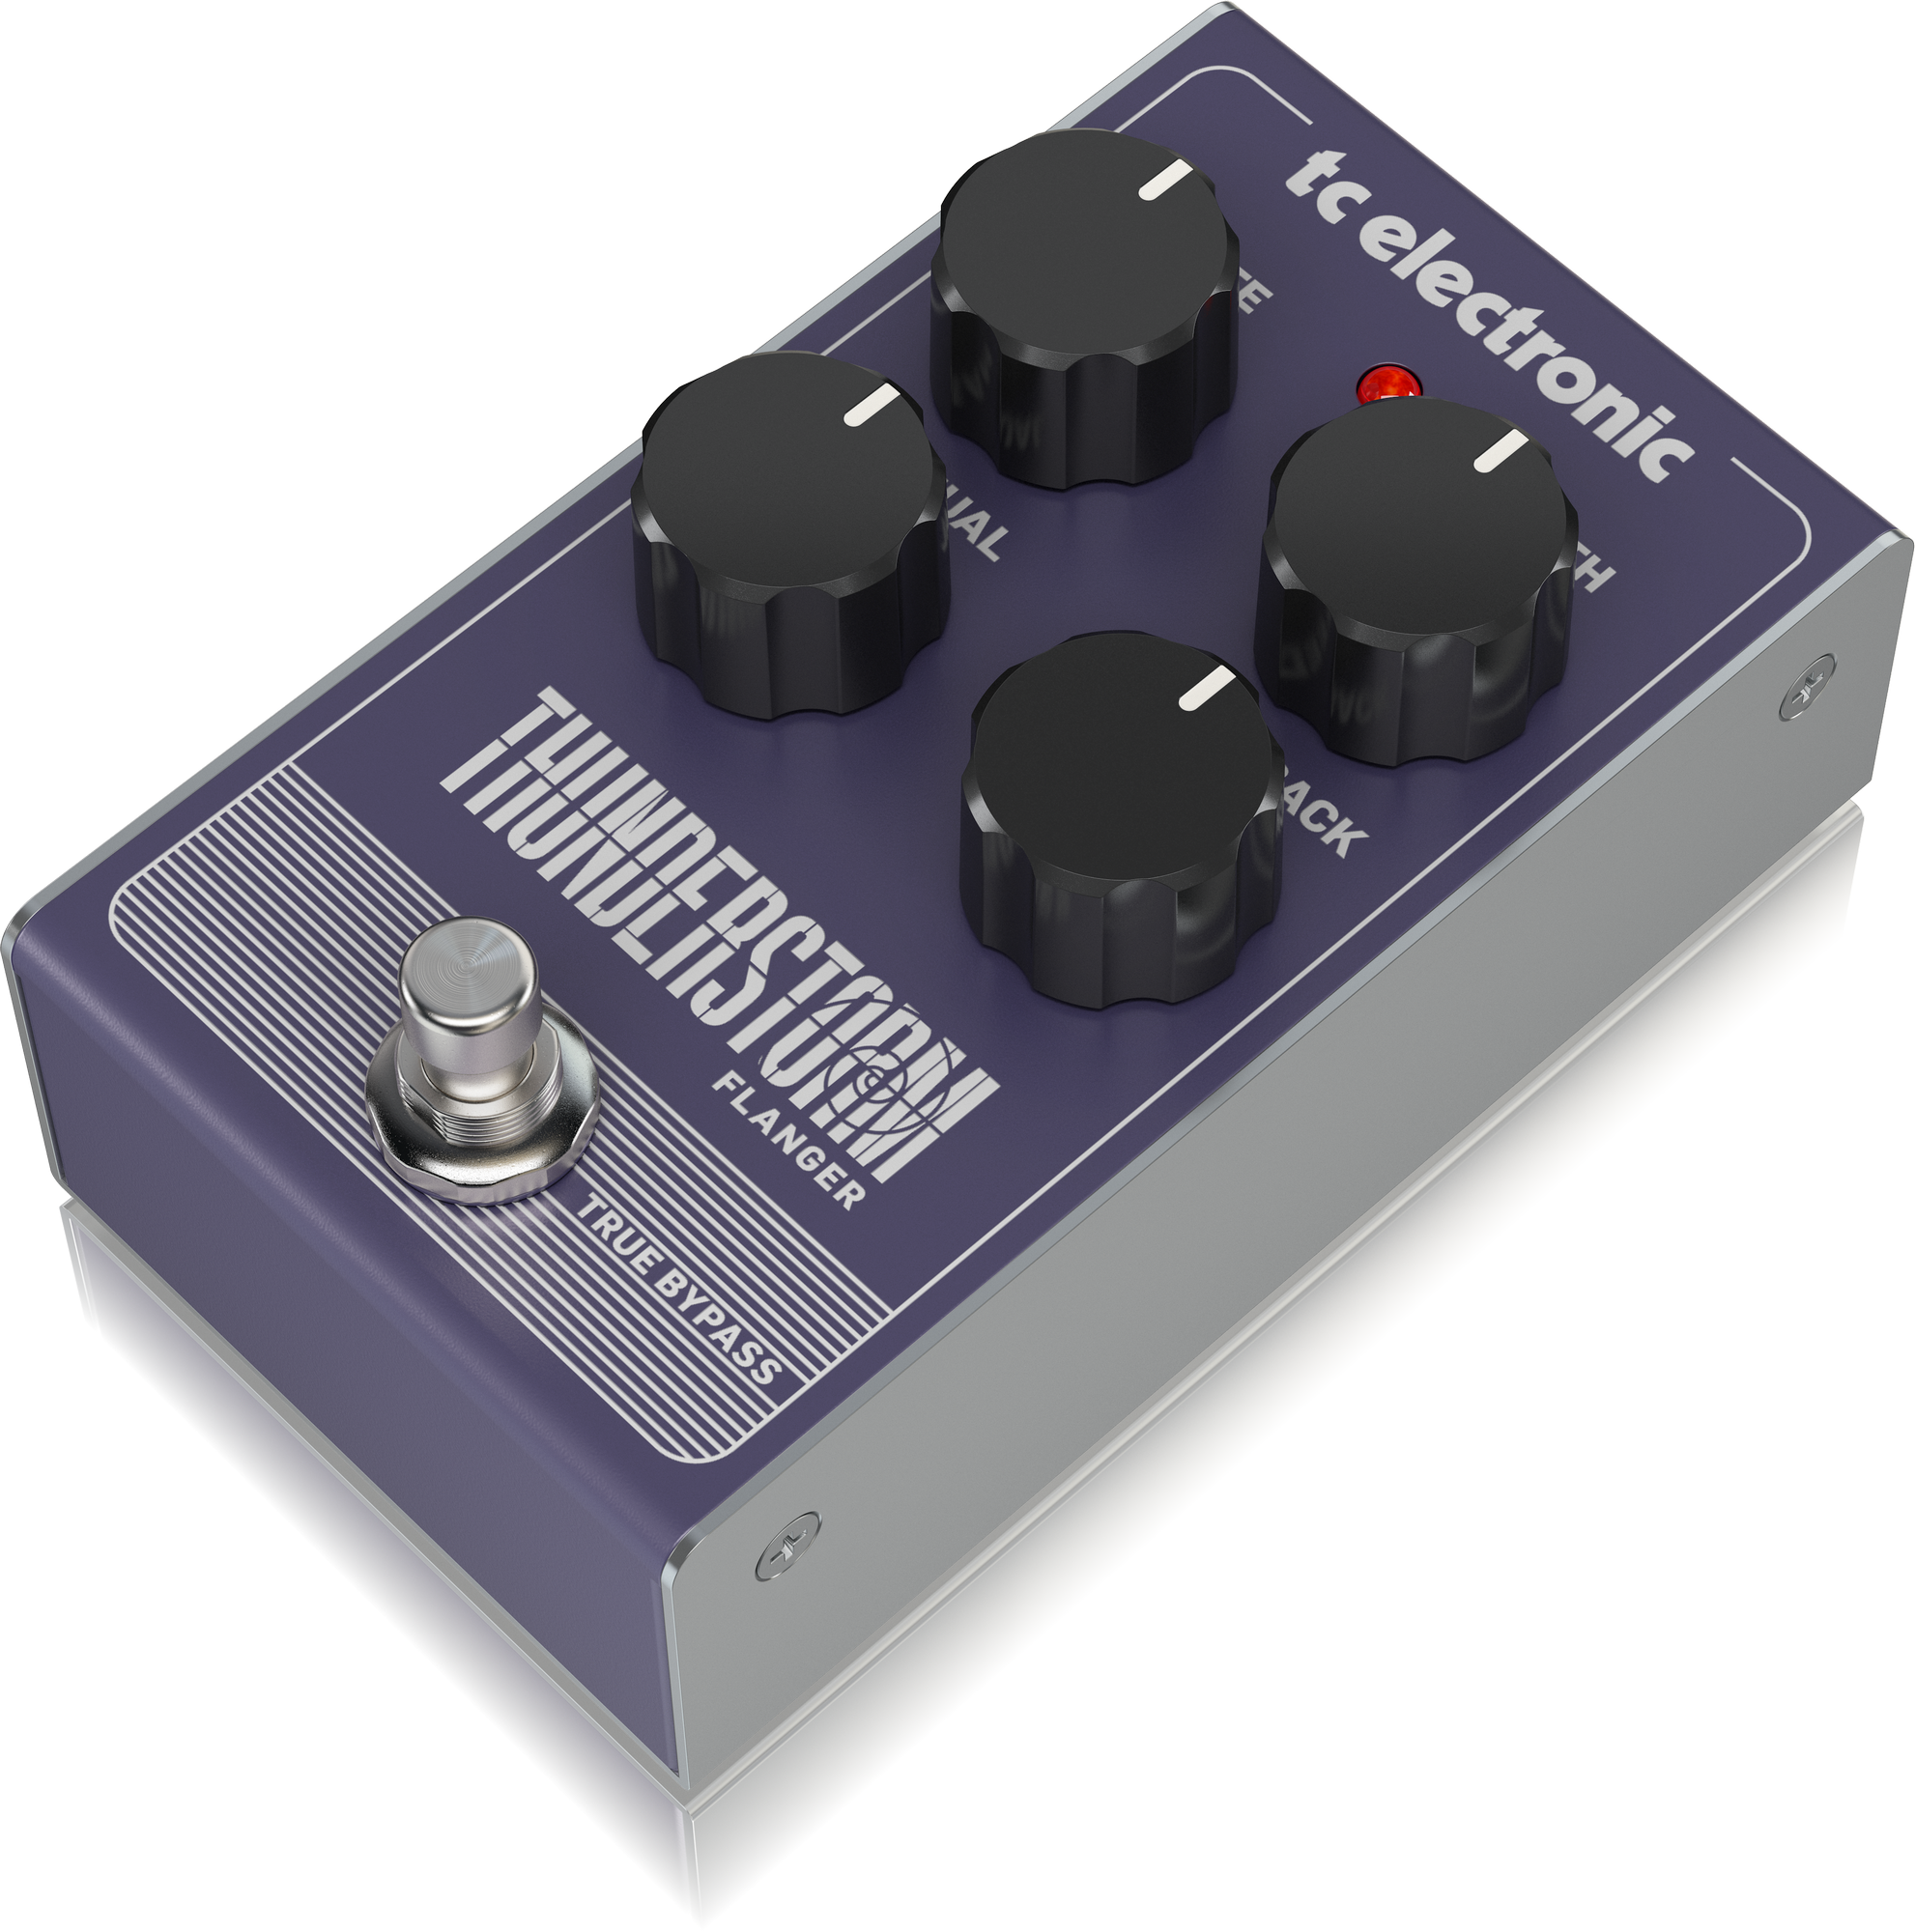 TC Electronic Thunderstorm Flanger Vintage-style Flanger Pedal With All-analog Bucket-brigade Circuit, TC ELECTRONIC, EFFECTS, tc-electronic-effects-tc-thunderstorm-flanger, ZOSO MUSIC SDN BHD